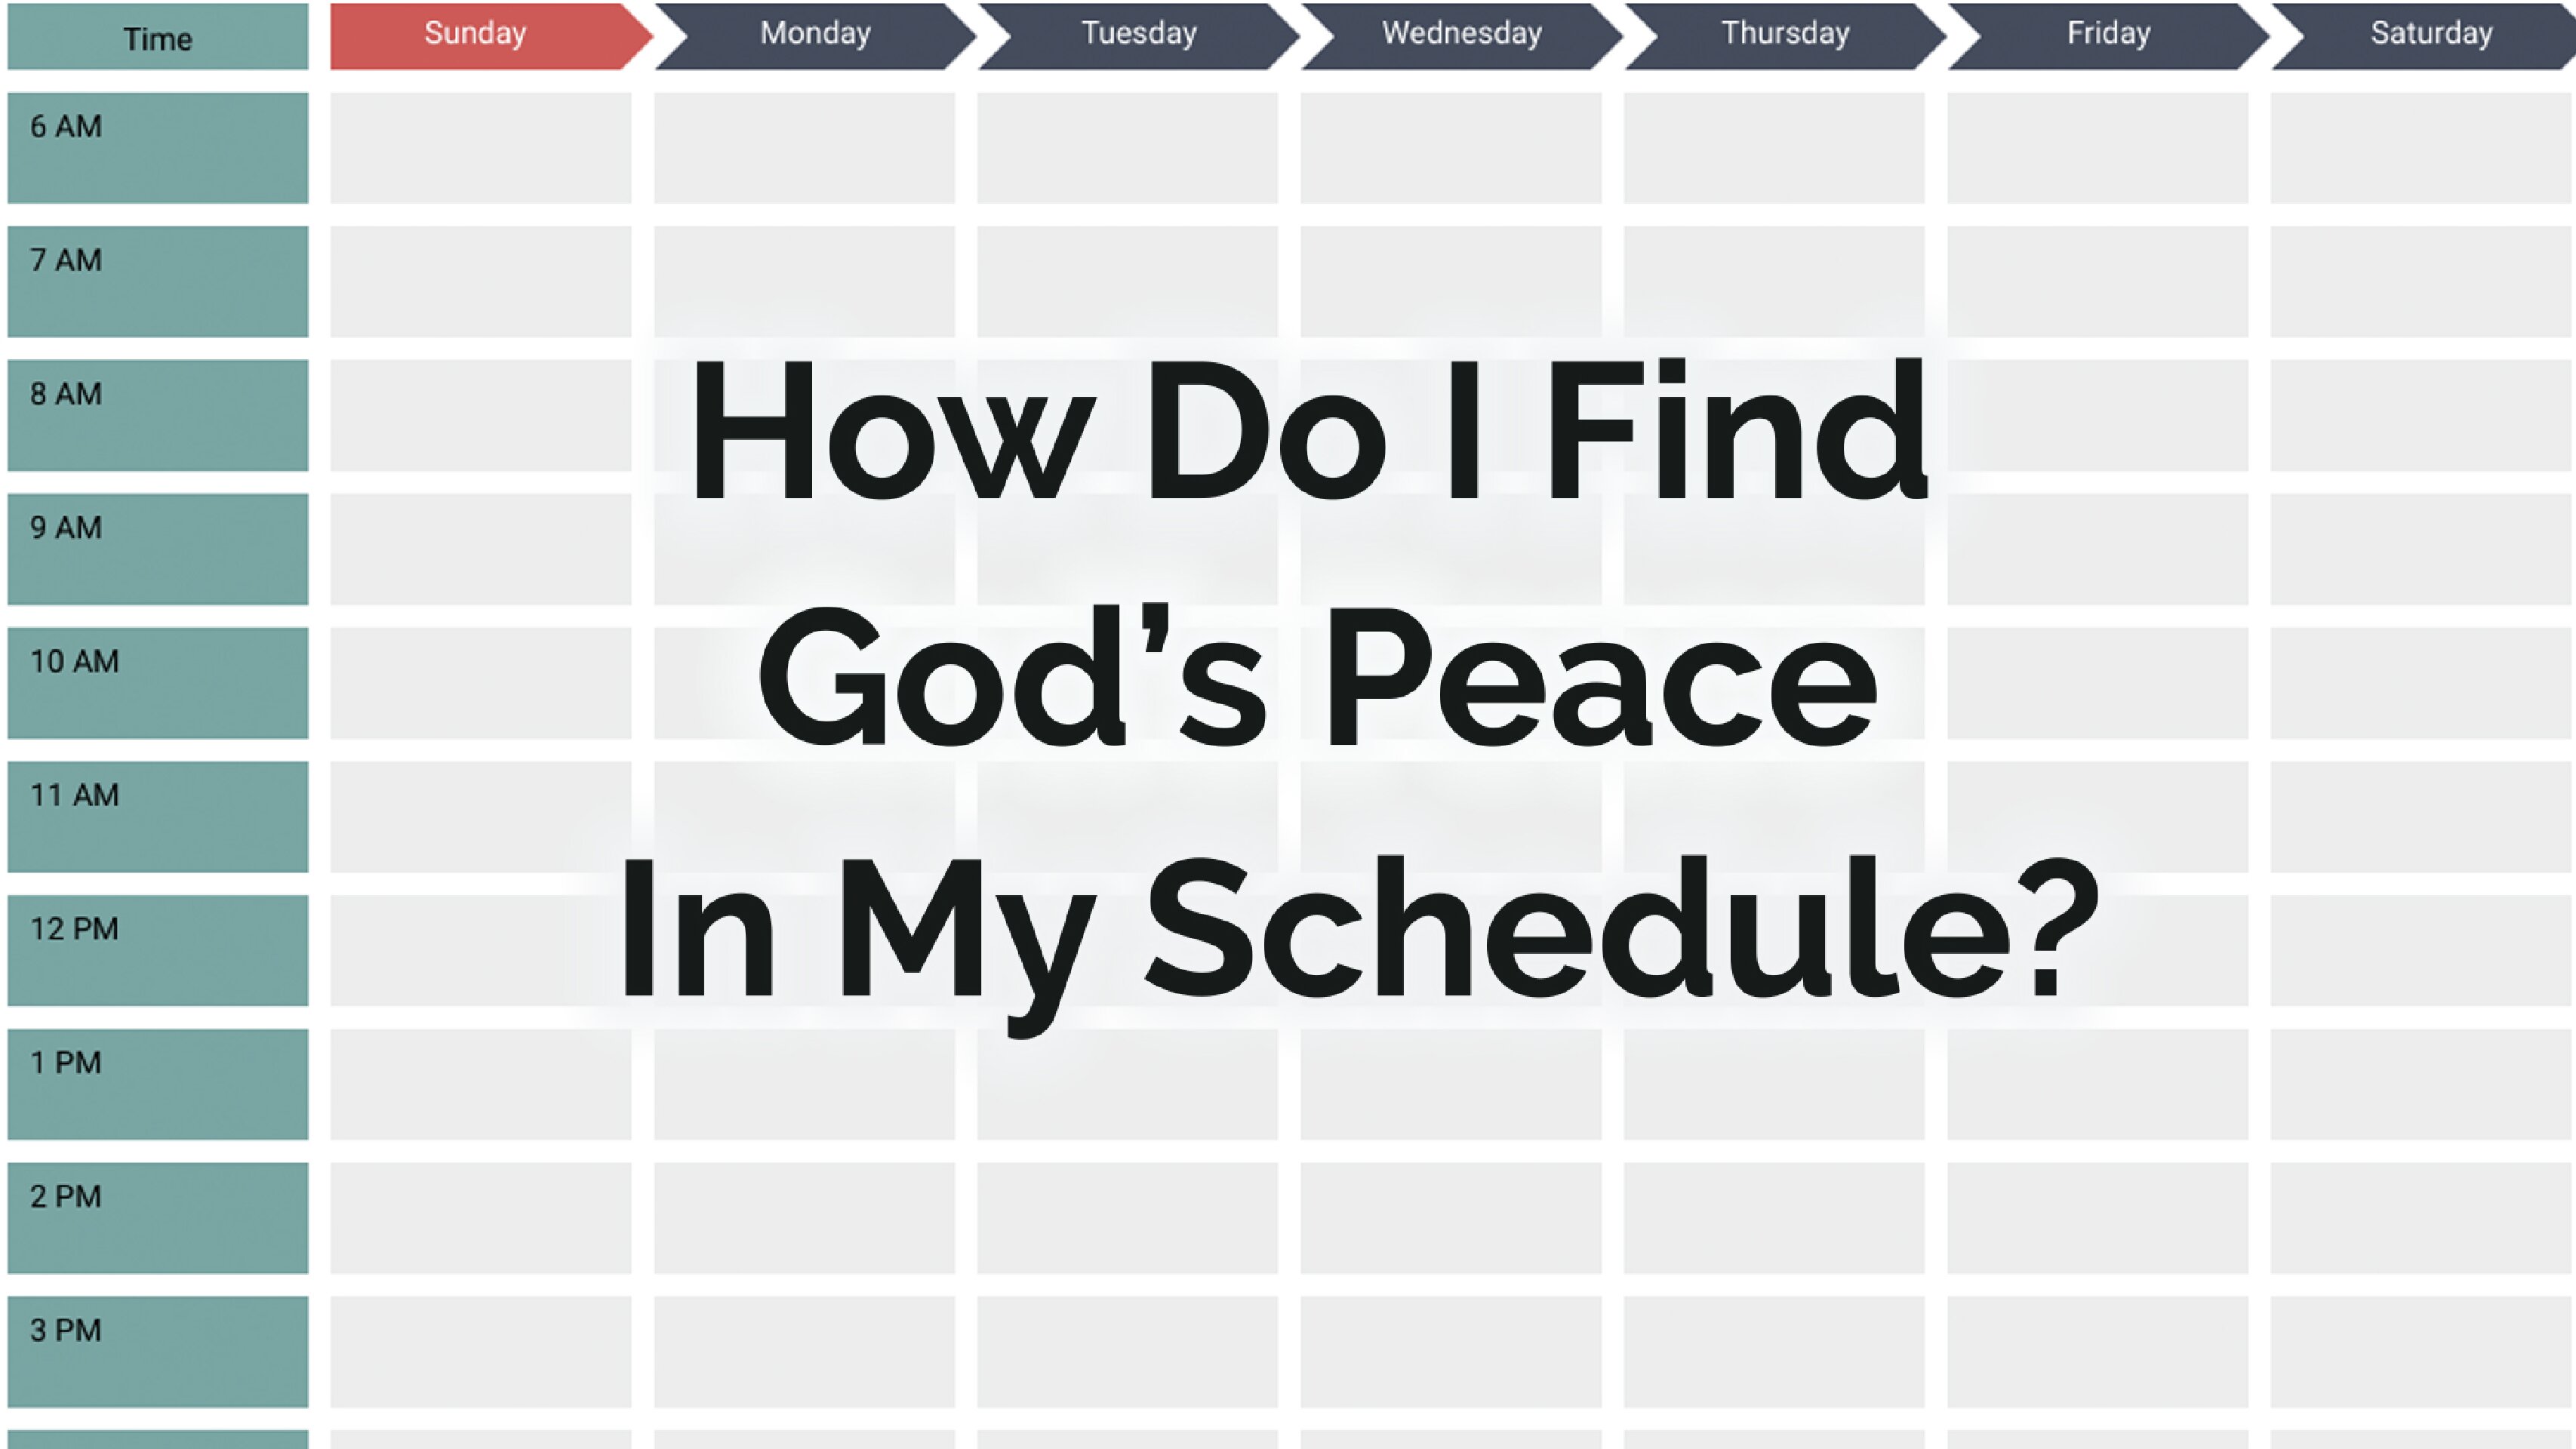 How Do I Find God’s Peace in My Schedule?